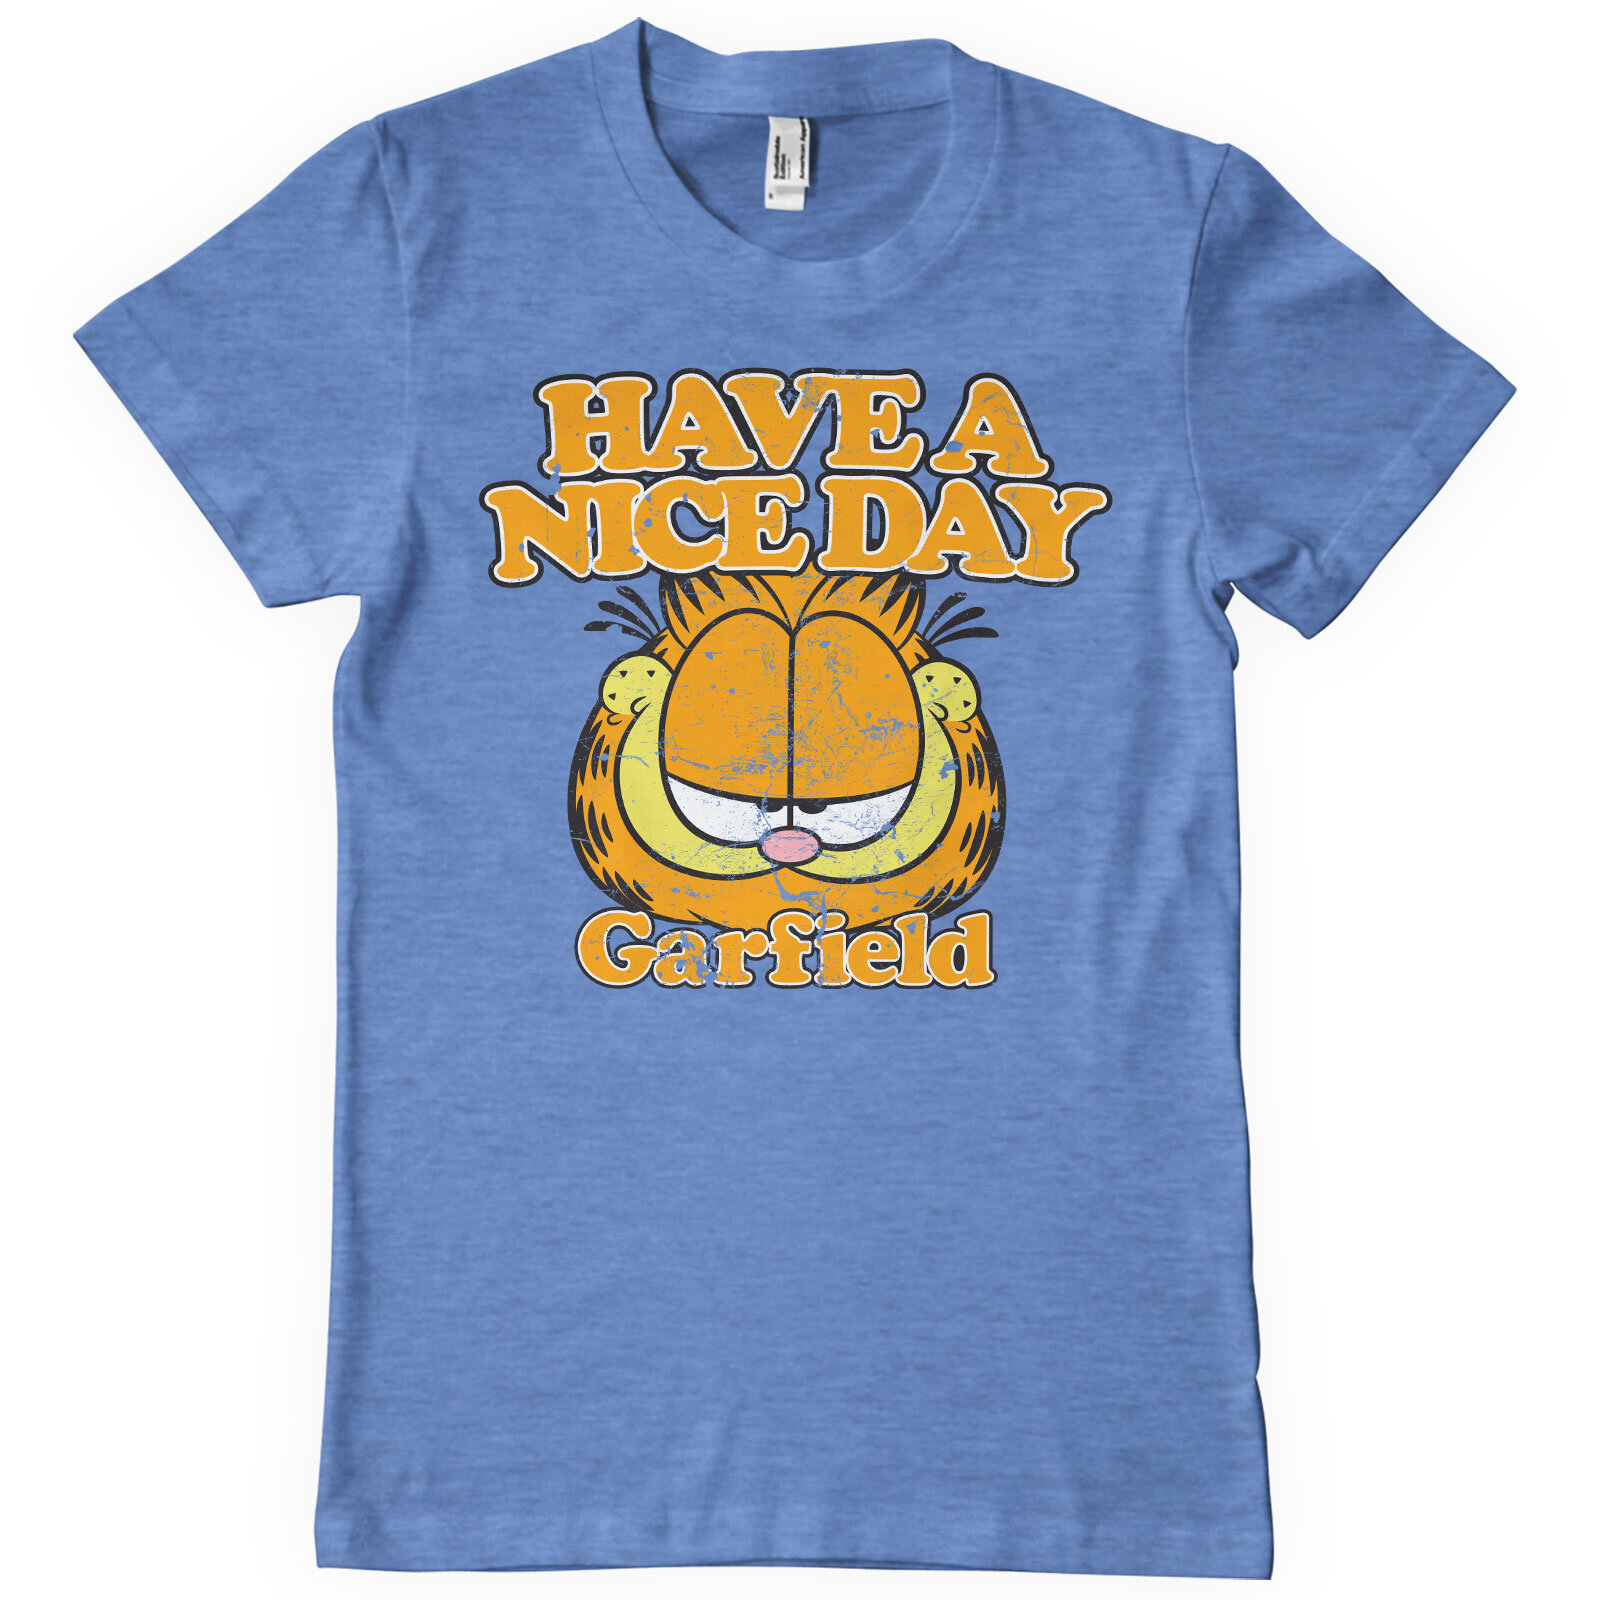 Garfield - Have A Nice Day T-Shirt